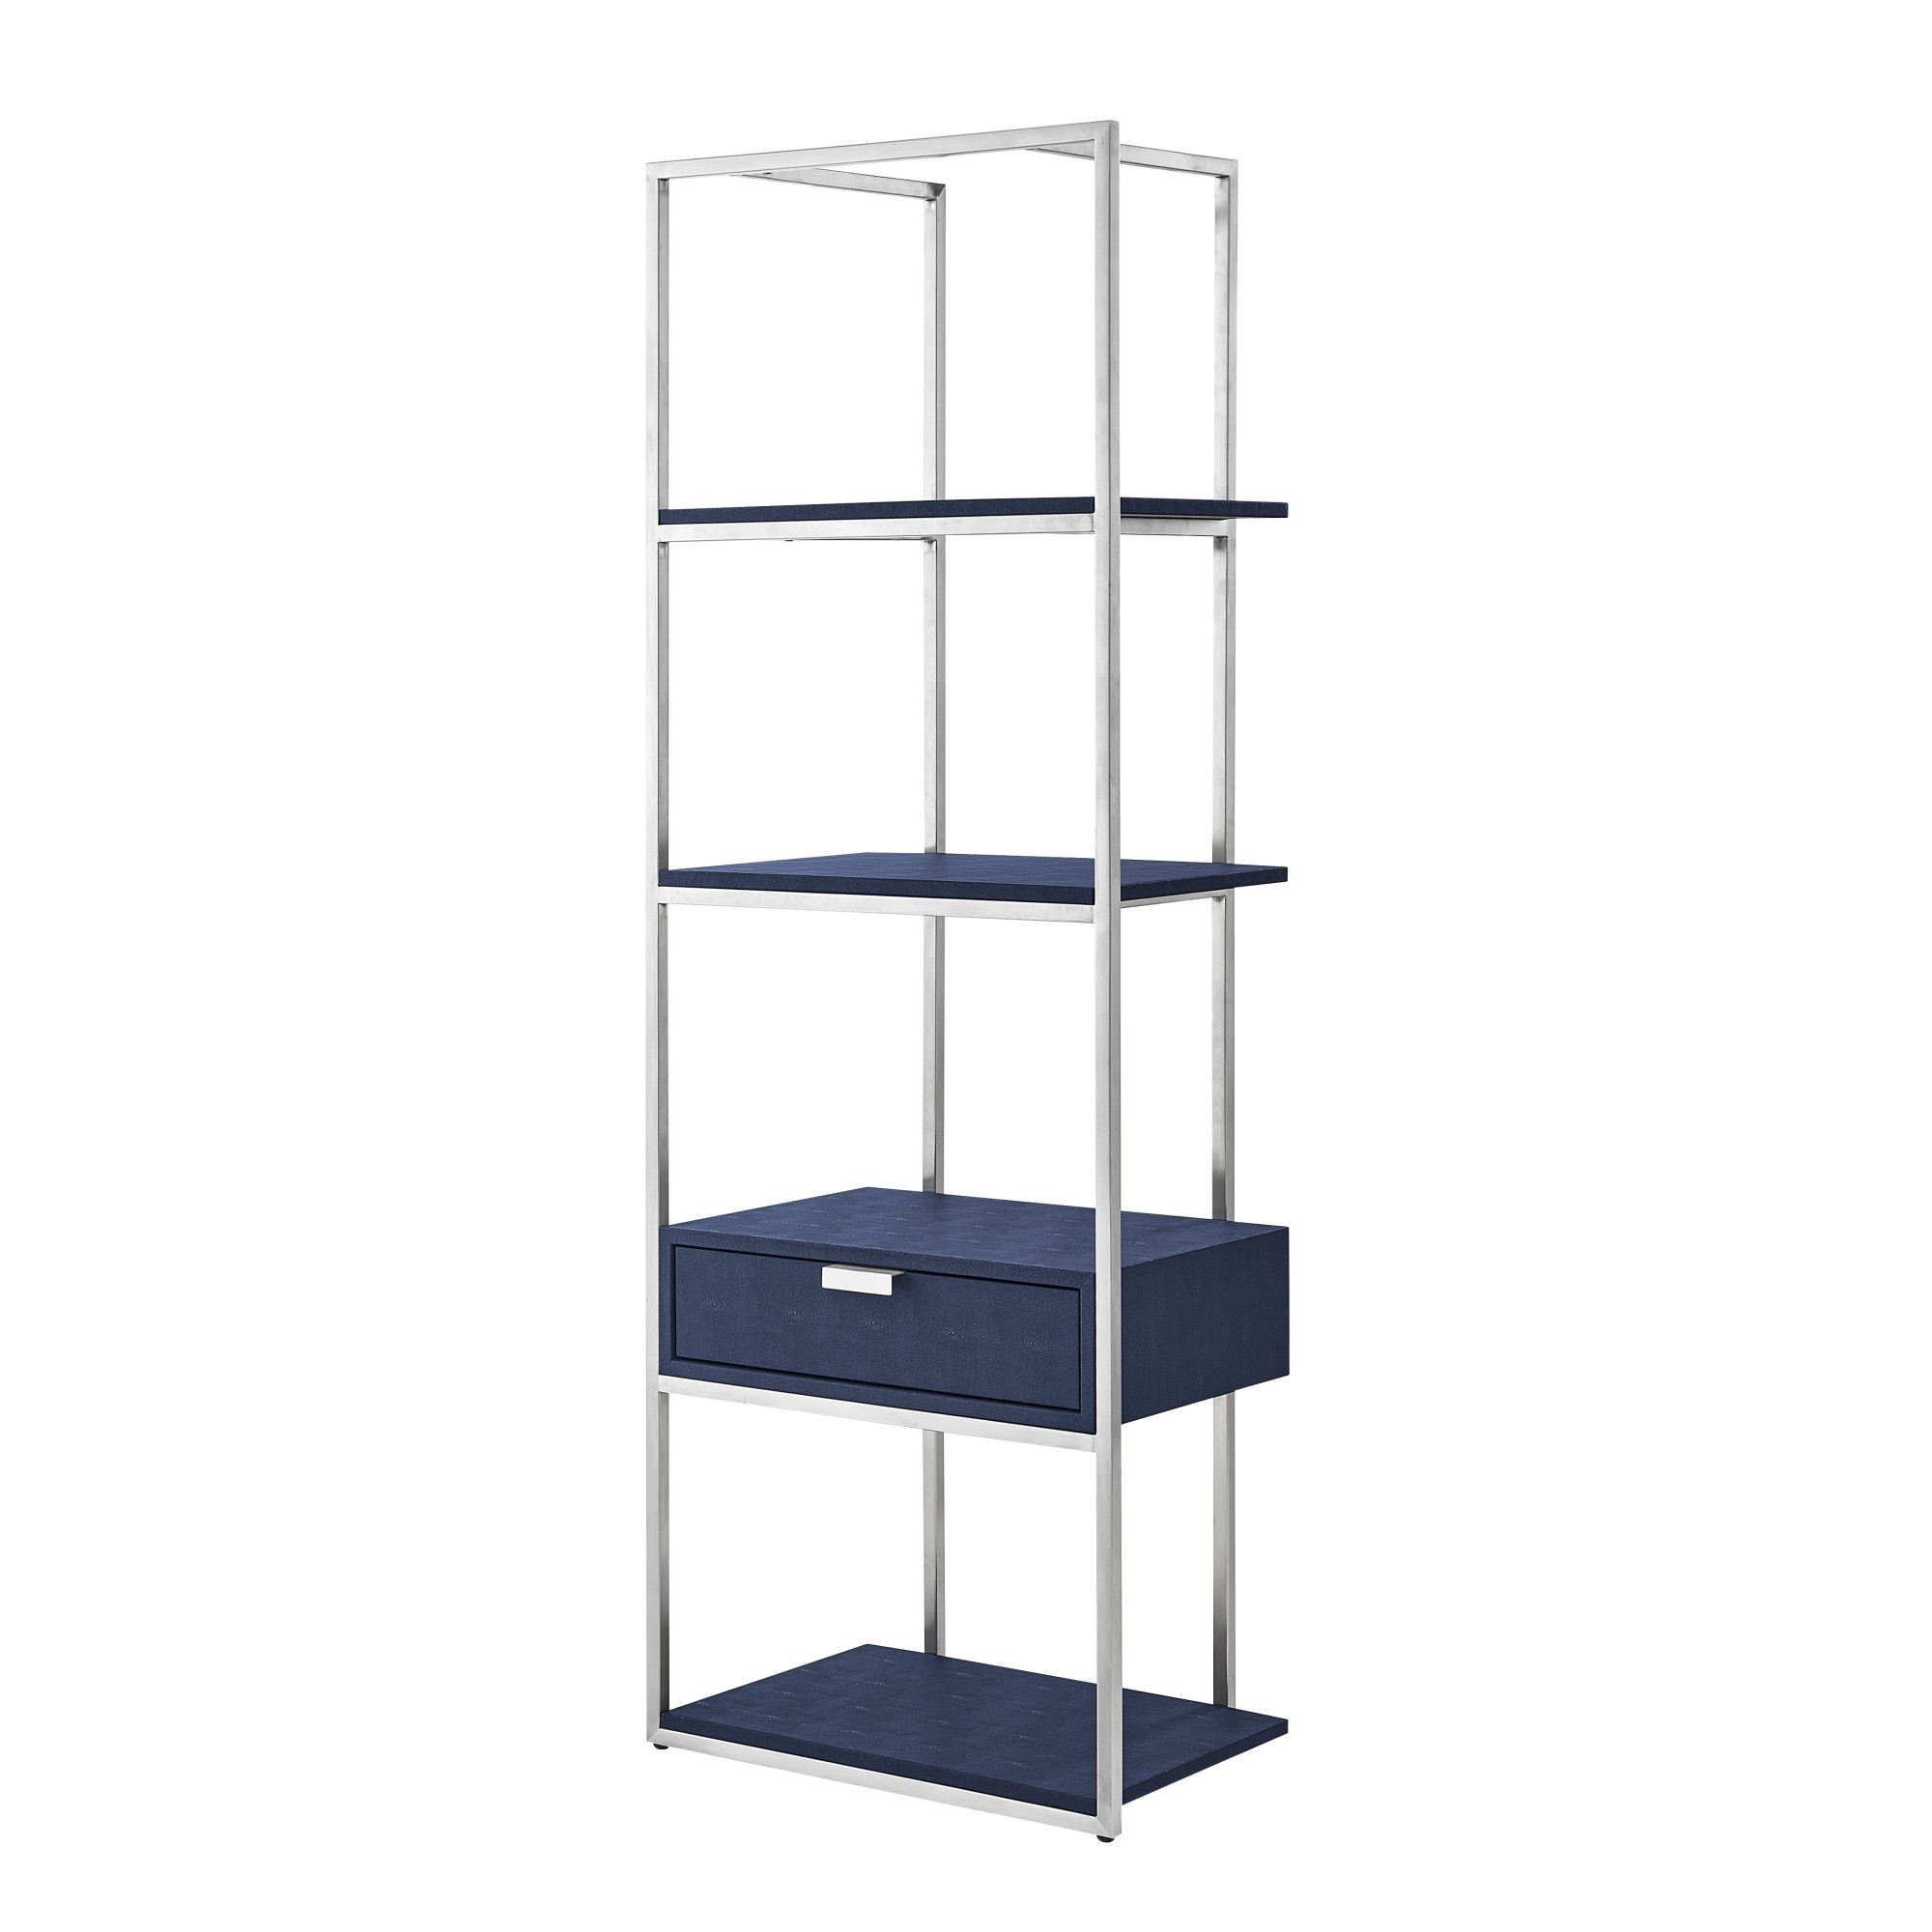 68" Navy Blue Stainless Steel Four Tier Etagere Bookcase with a drawer-544739-1